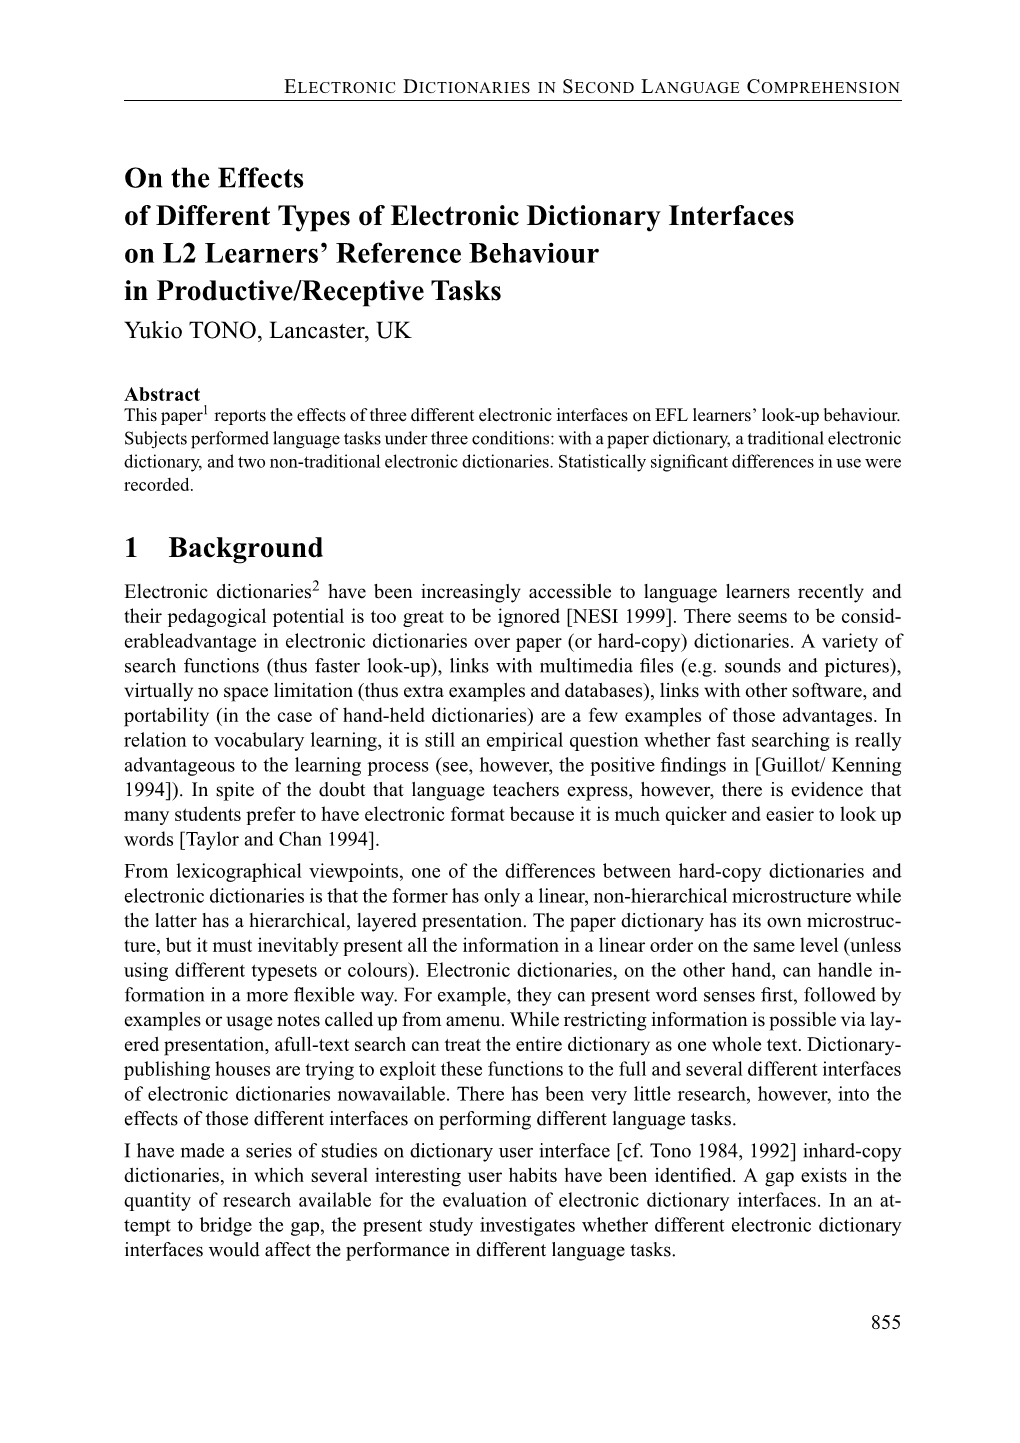 On the Effects of Different Types of Electronic Dictionary Interfaces on L2 Learners' Reference Behaviour in Productive/Receptive Tasks Yukio TONO, Lancaster, UK